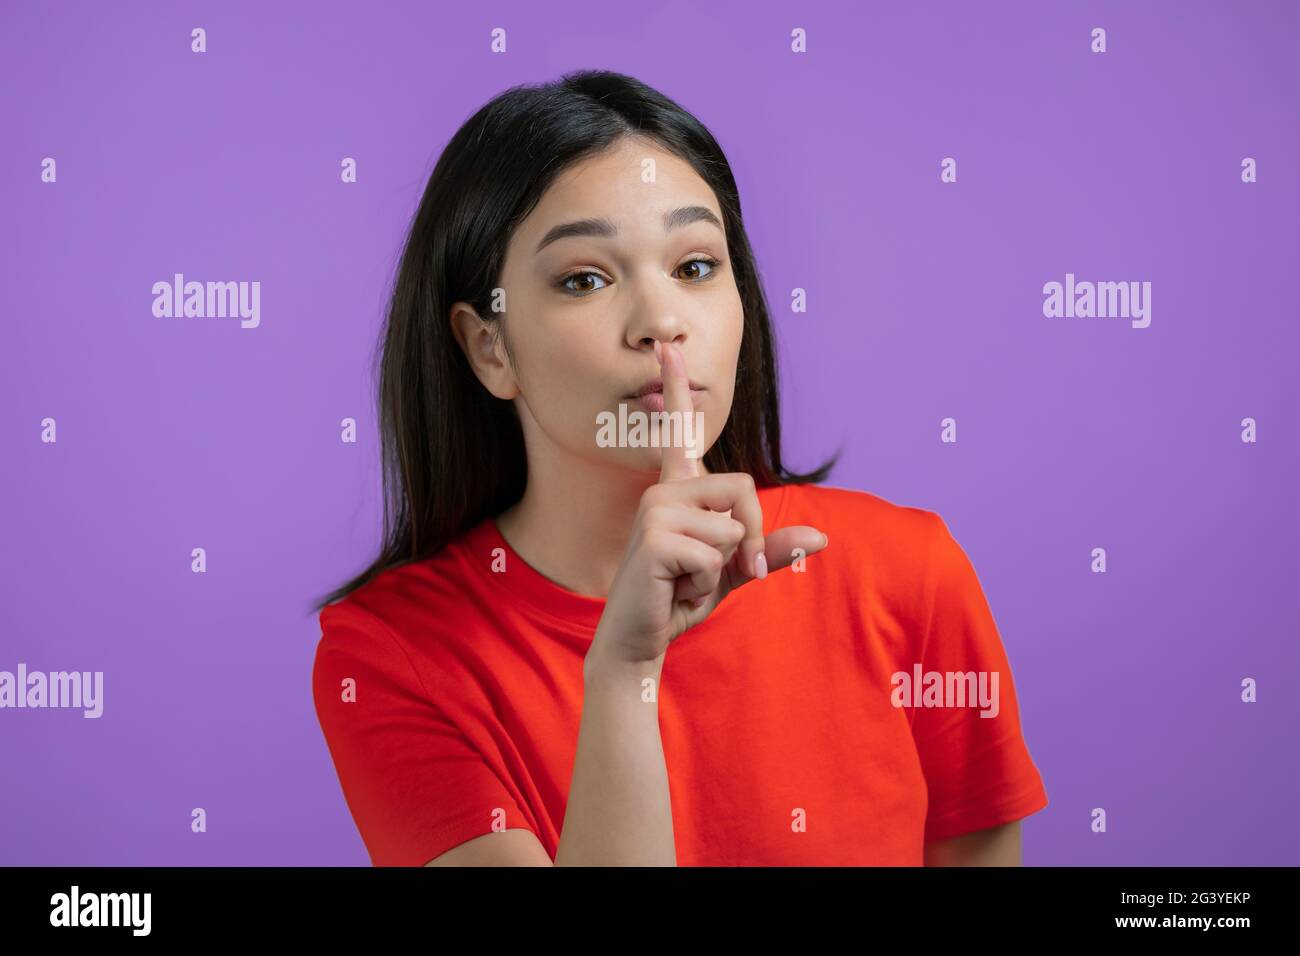 Smiling woman holding finger on her lips over violet background. Gesture of shhh, secret, silence. Close up. Stock Photo